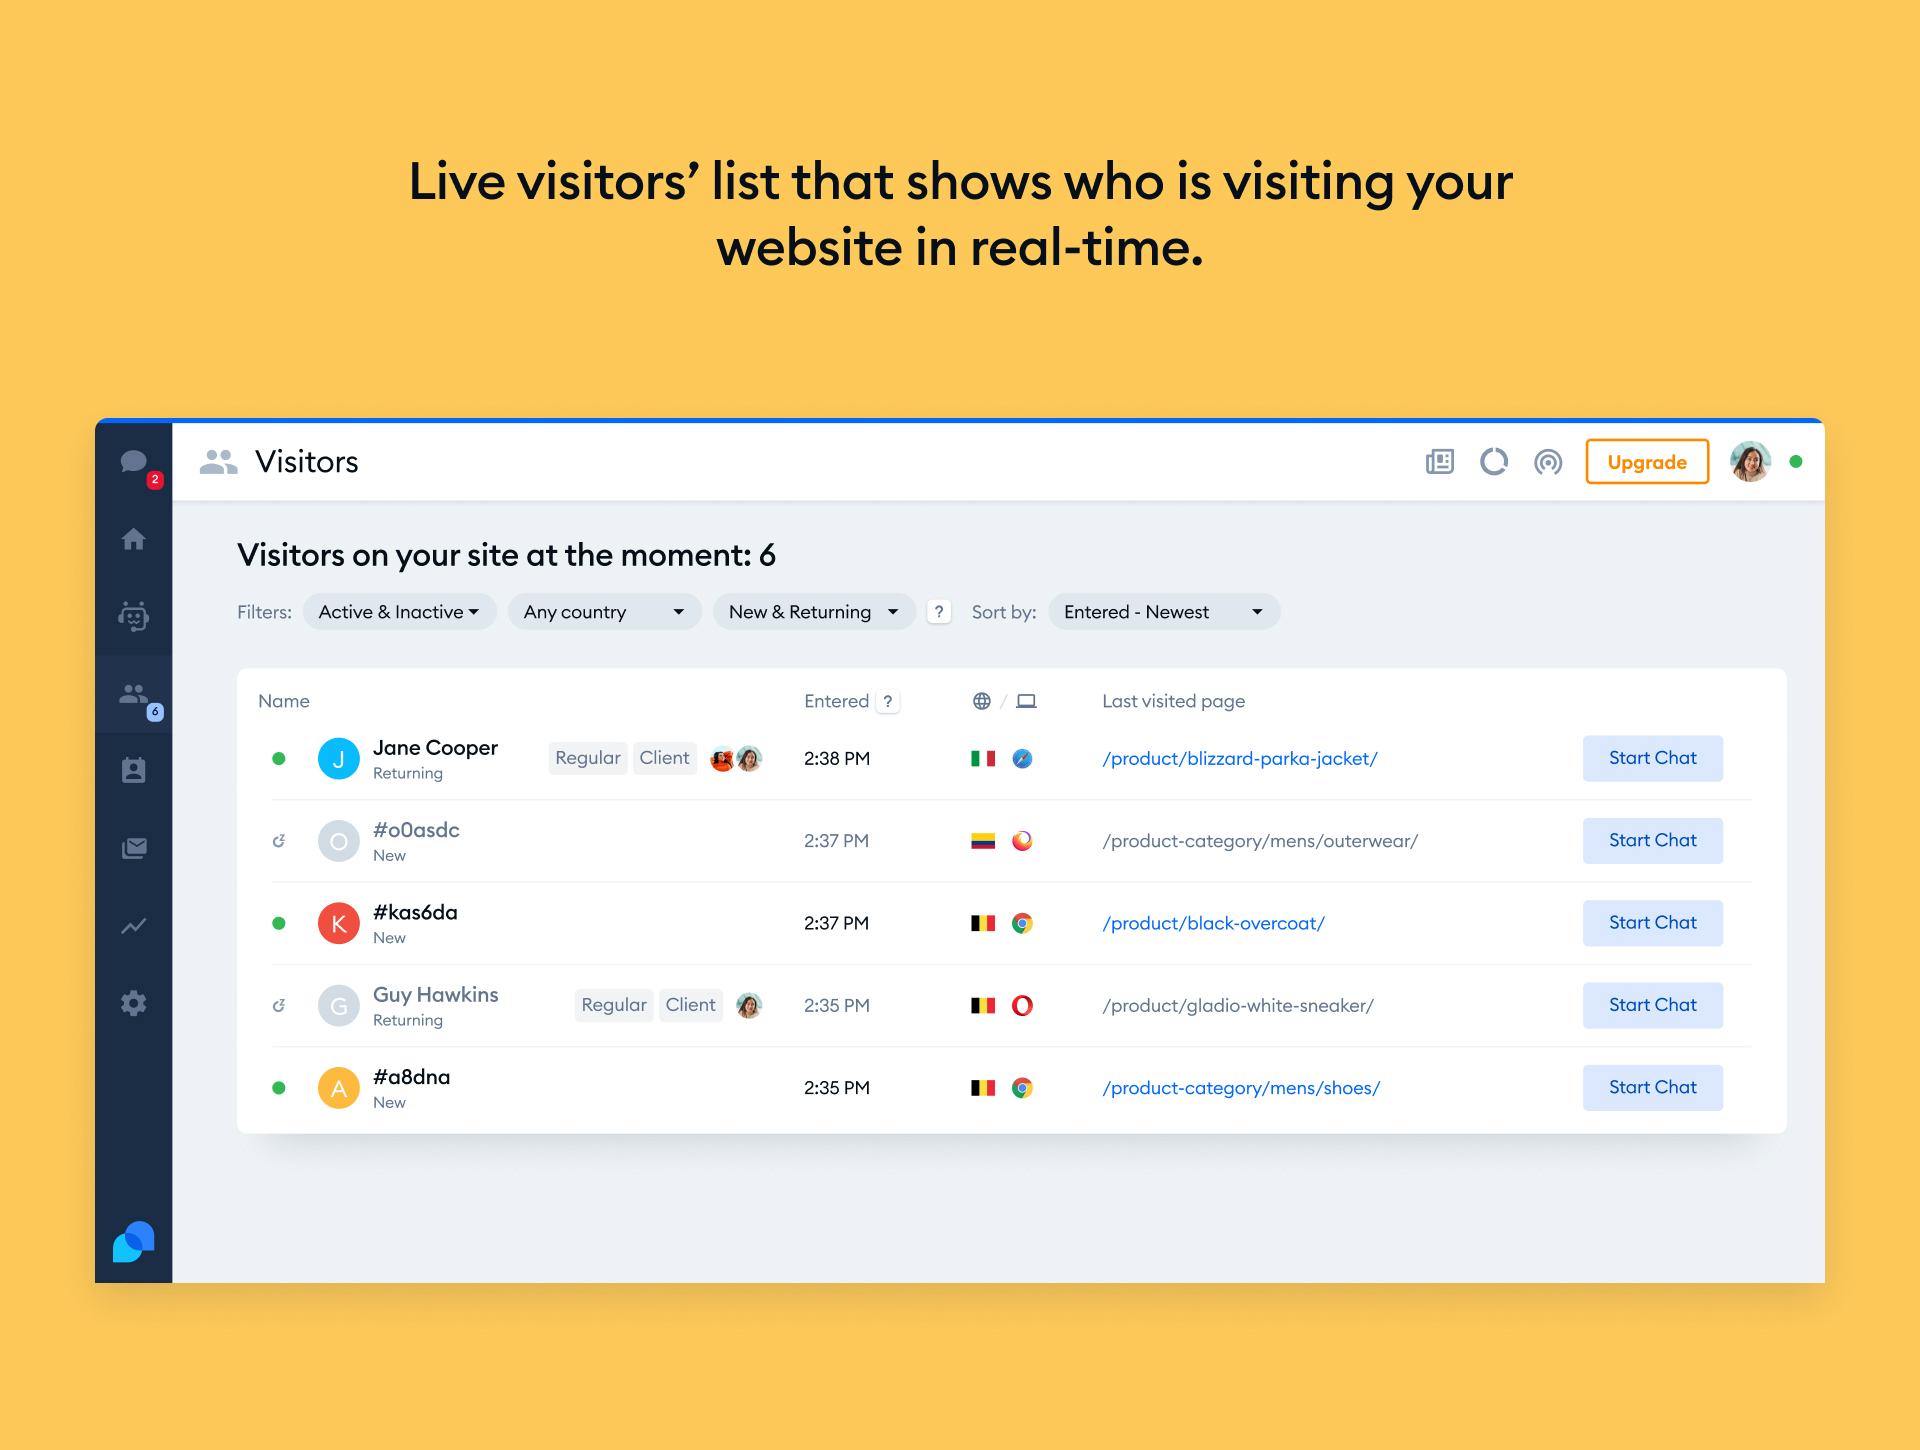 Tidio Software - Live visitors' list that shows who is visiting your website in real-time